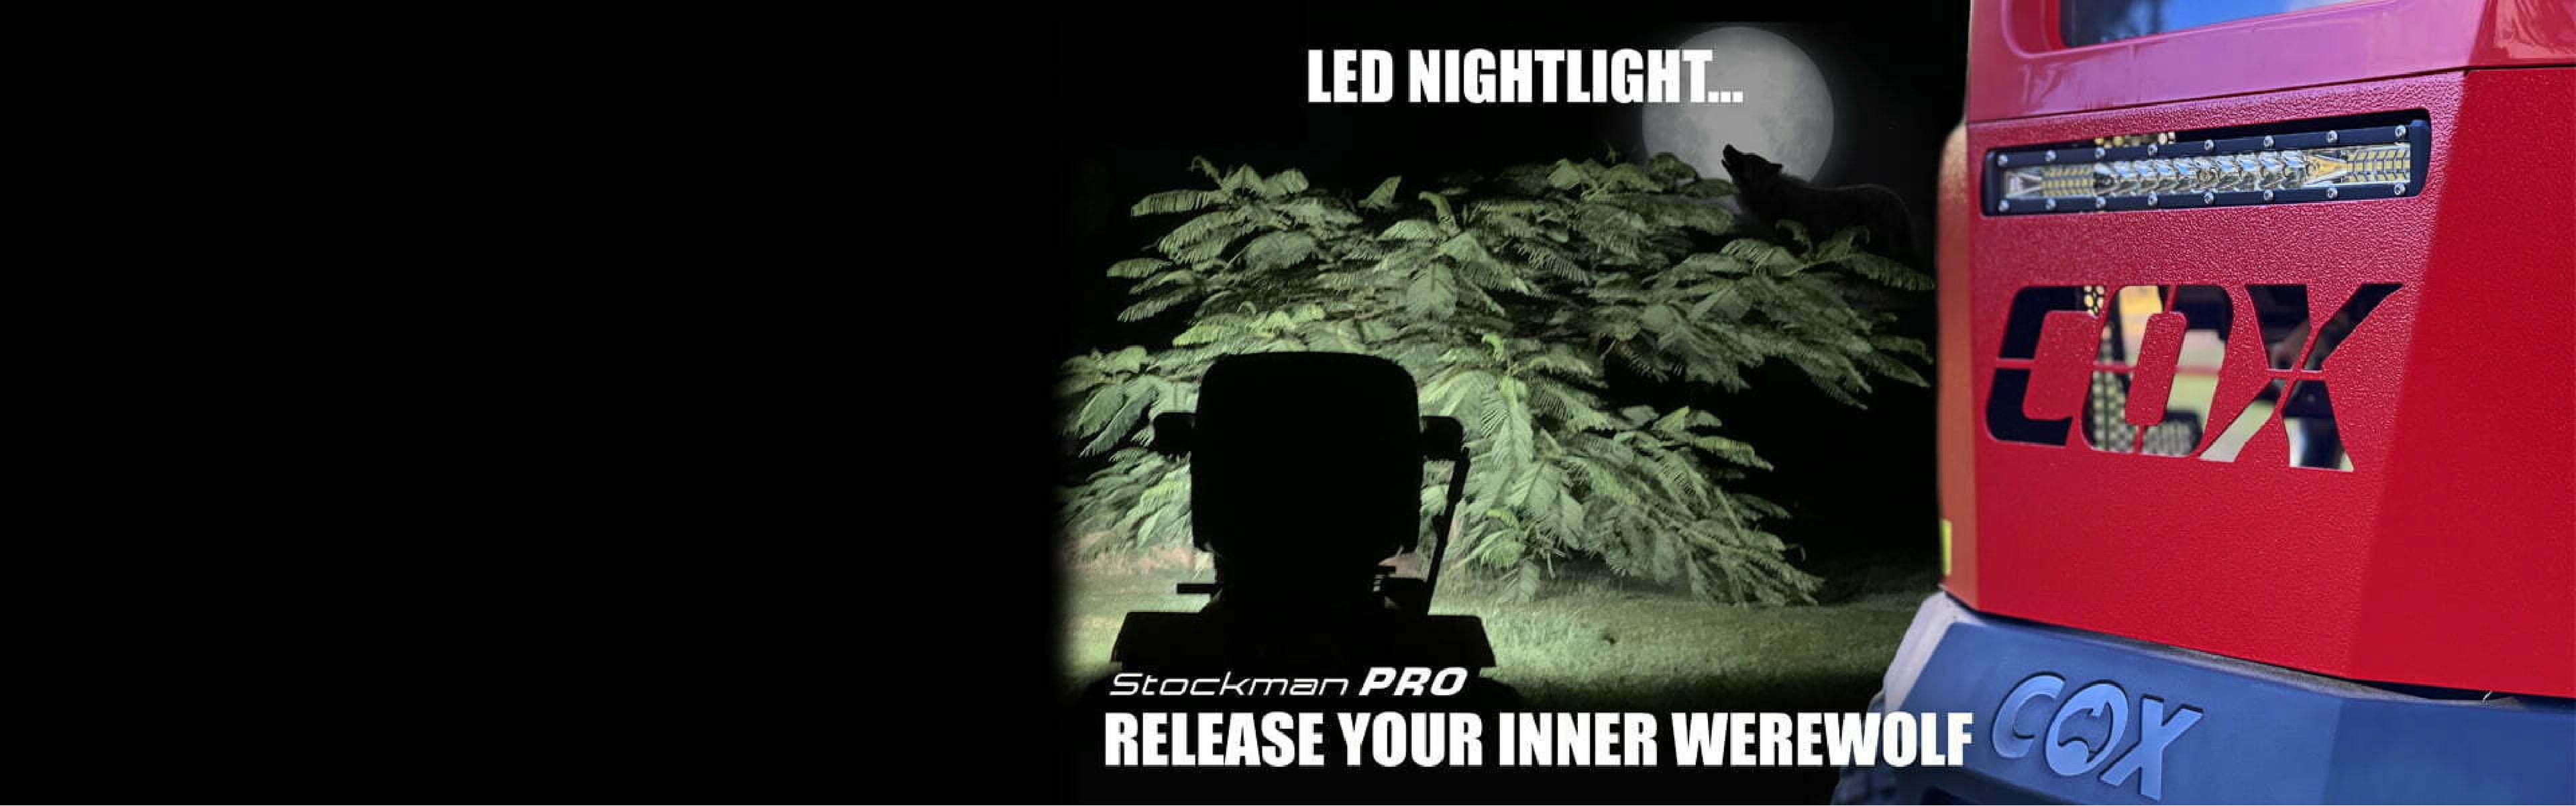 COX Mowers_Stockman Pro LED_Nightlight graphic showing the power of the nightlight in the dark by lighting up a garden at night